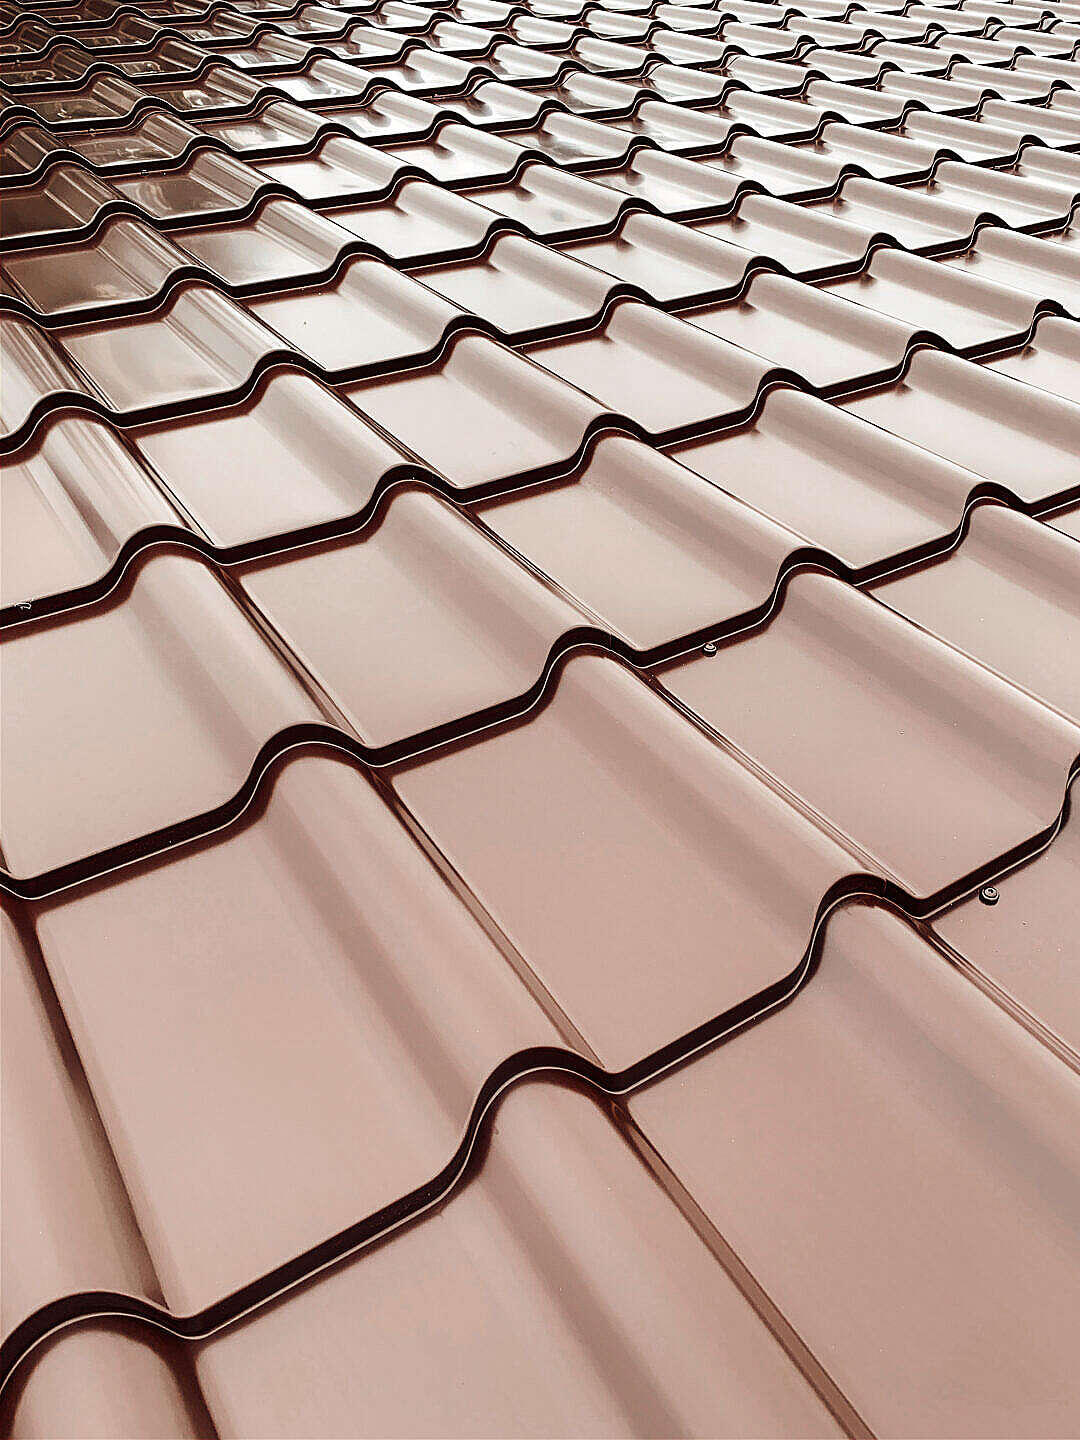 Download Red Roof Tiles Detail FREE Stock Photo